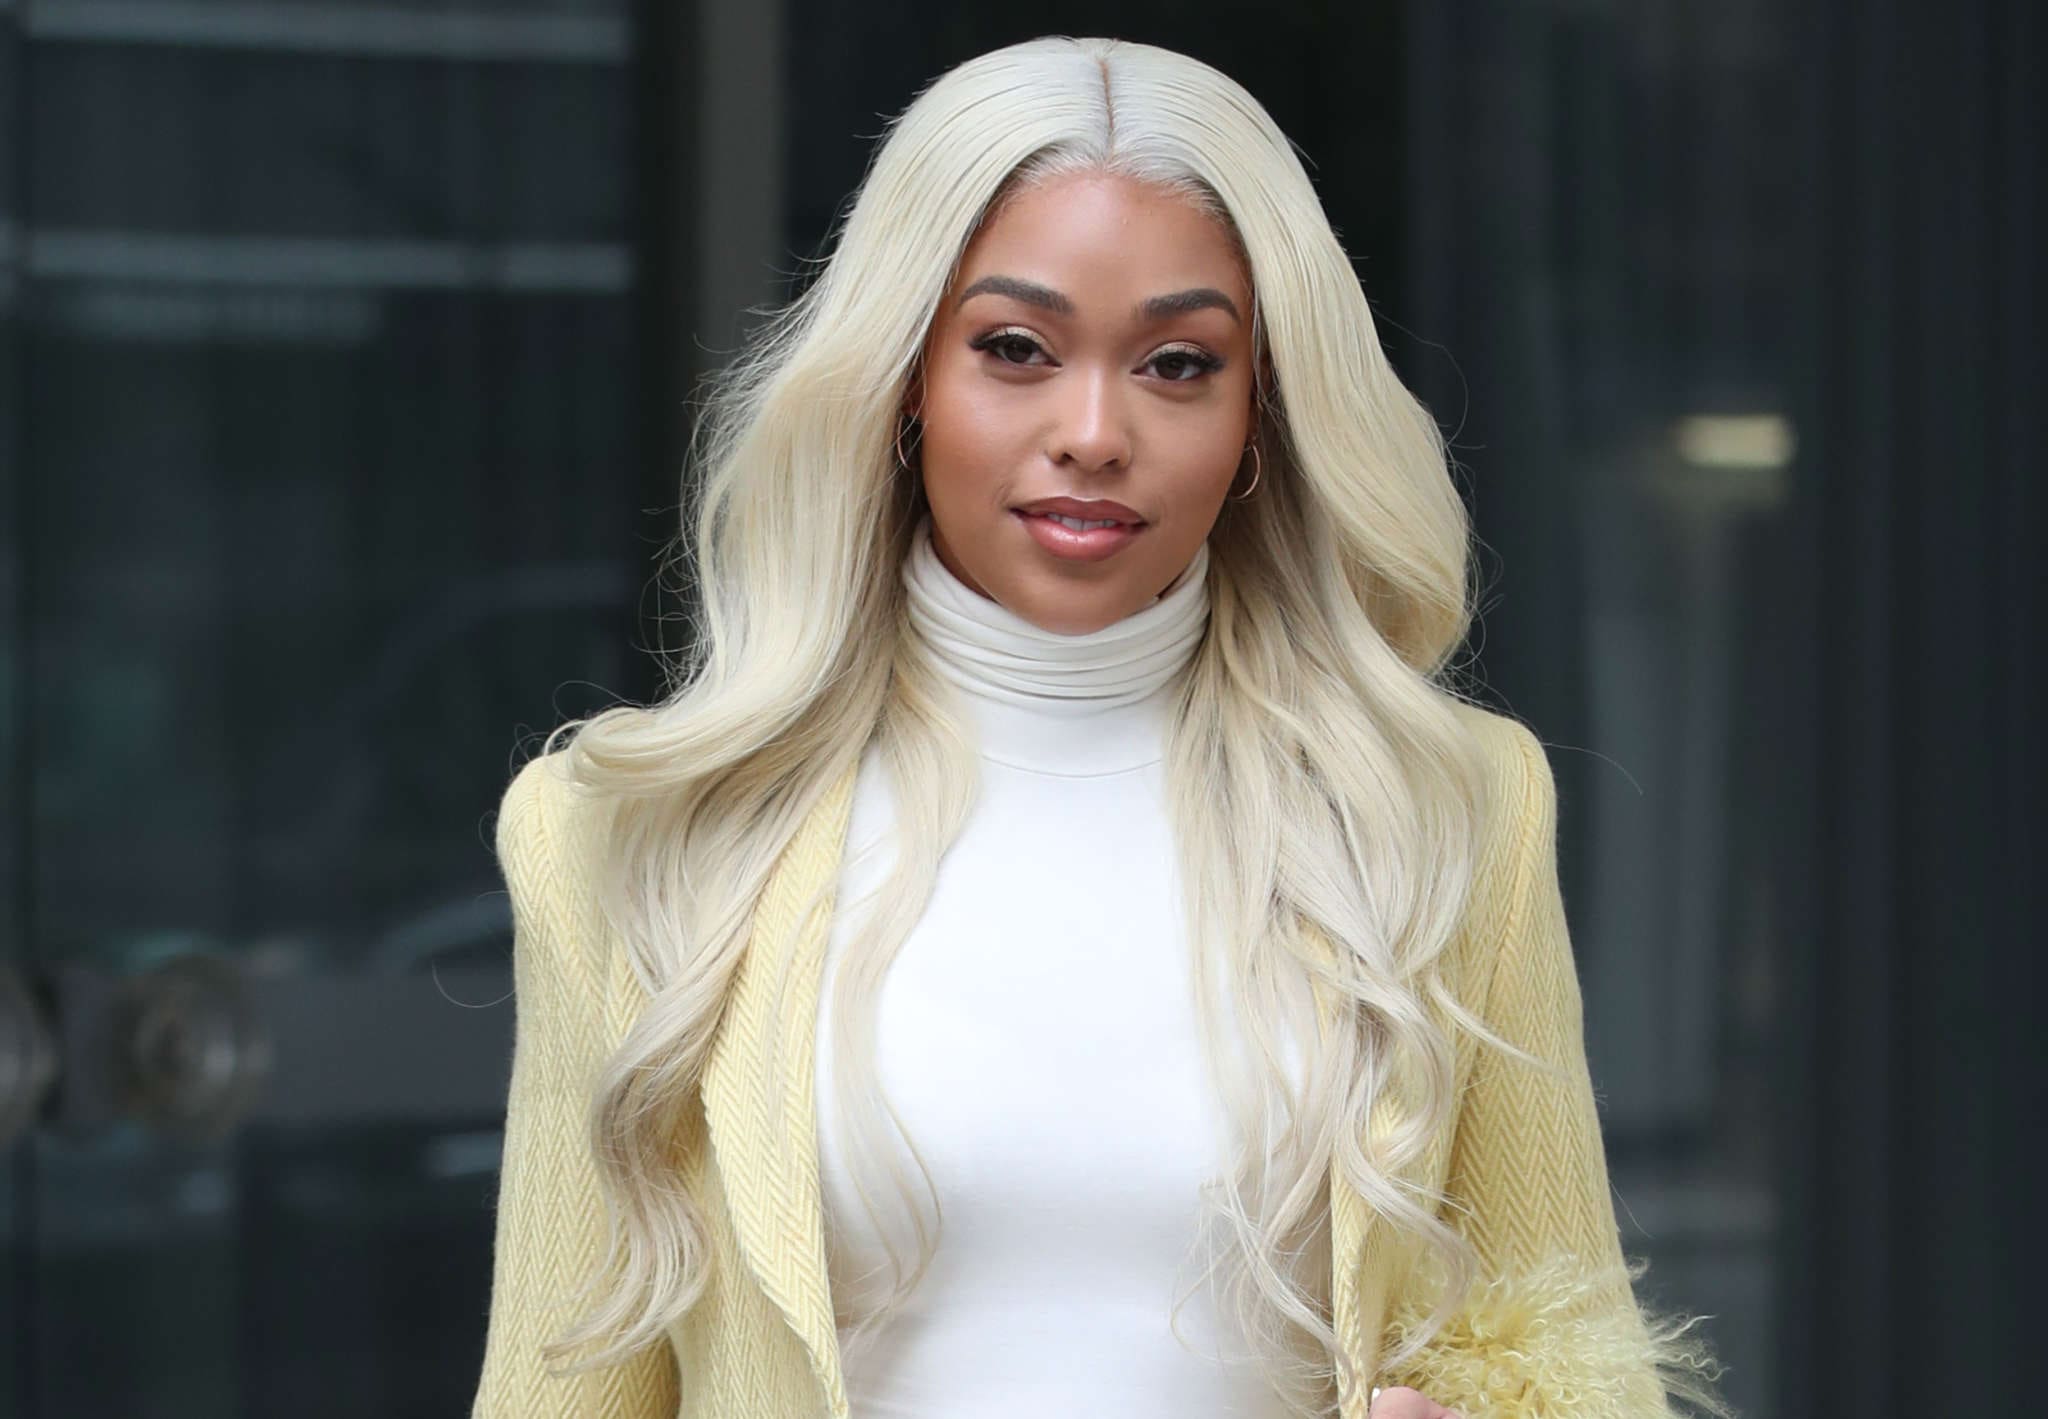 Erica Mena And Jordyn Woods Worked Together At BET's Thriller, 'Sacrifice' - See The Trailer!